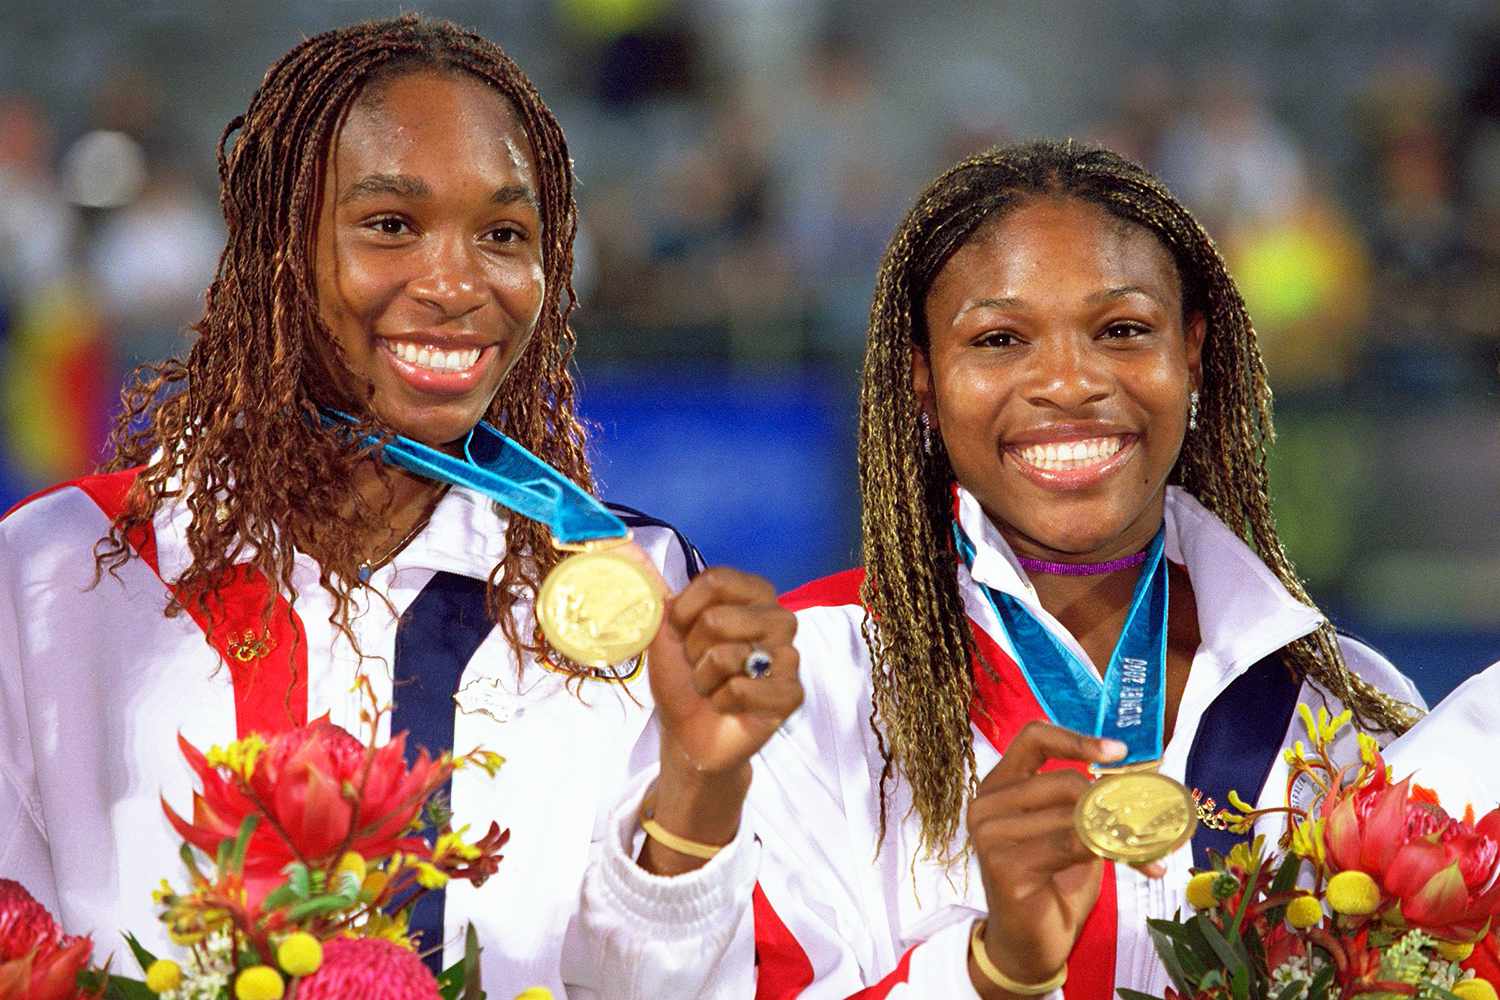 Venus and Serena Williams of the USA celebrate gold after winning the Womens Doubles Tennis Final at the NSW Tennis Centre on Day 13 of the Sydney 2000 Olympic Games in Sydney, Australia.